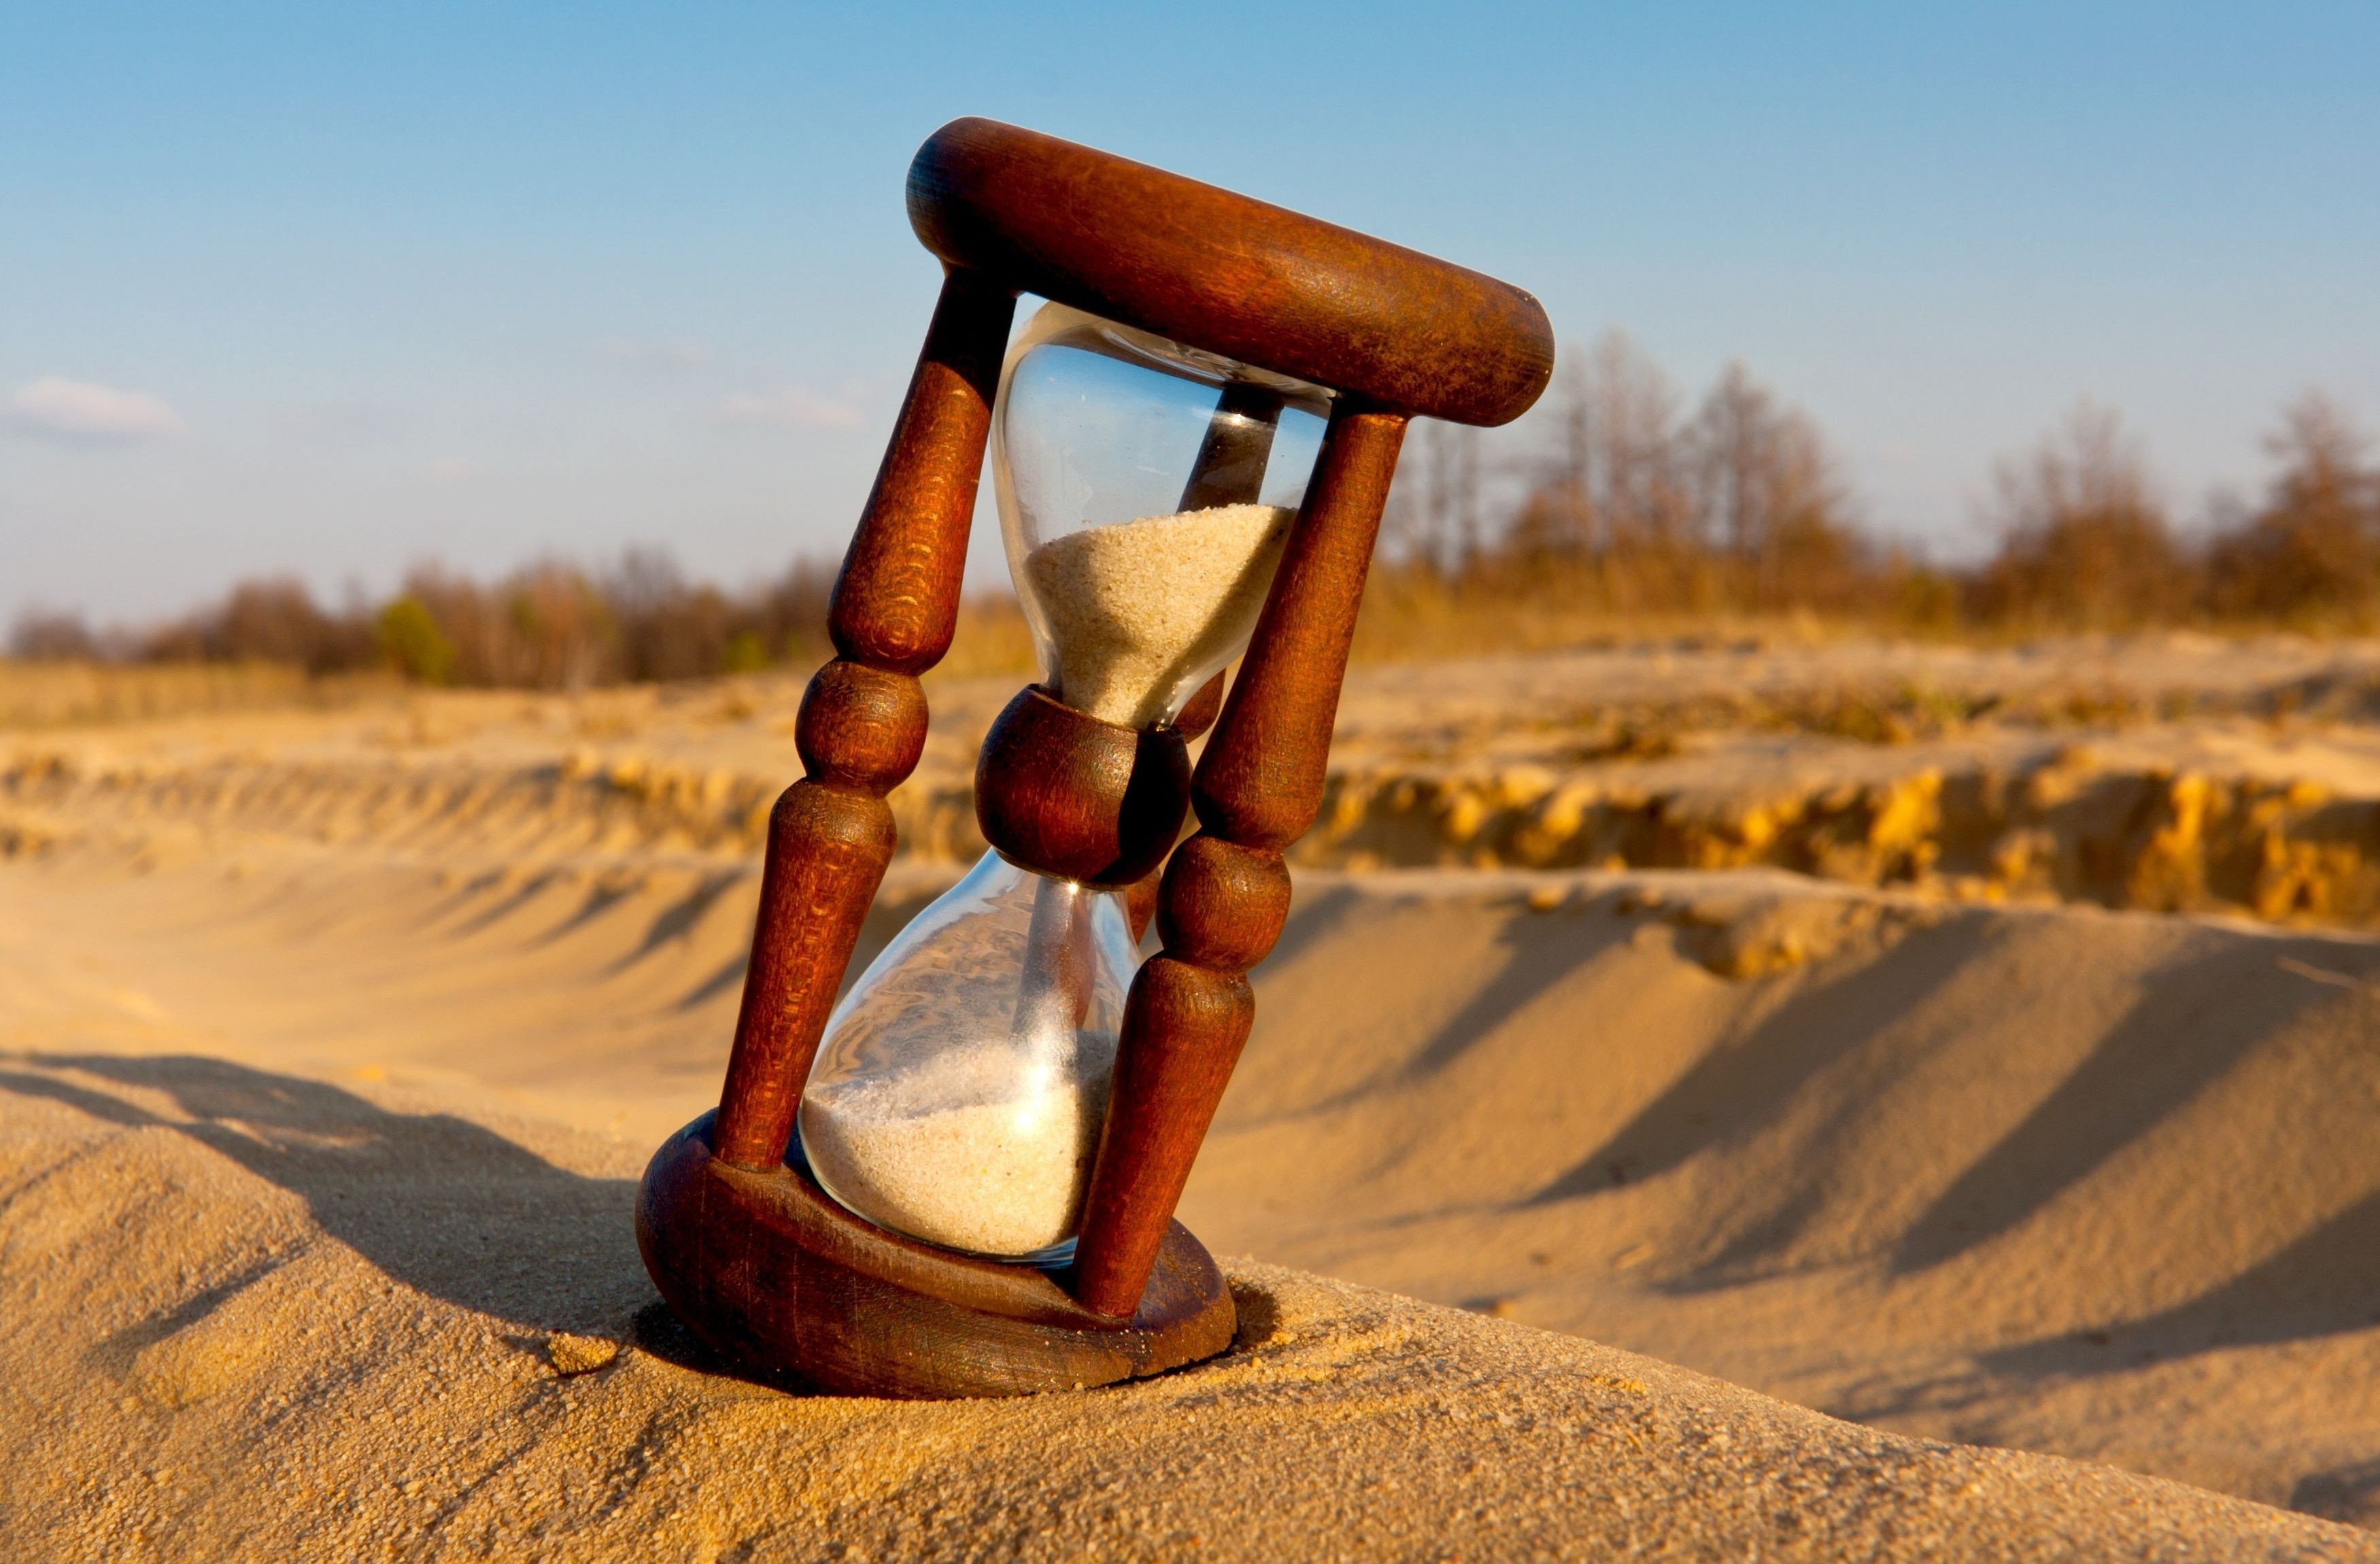 Popular Hourglass Image for Phone